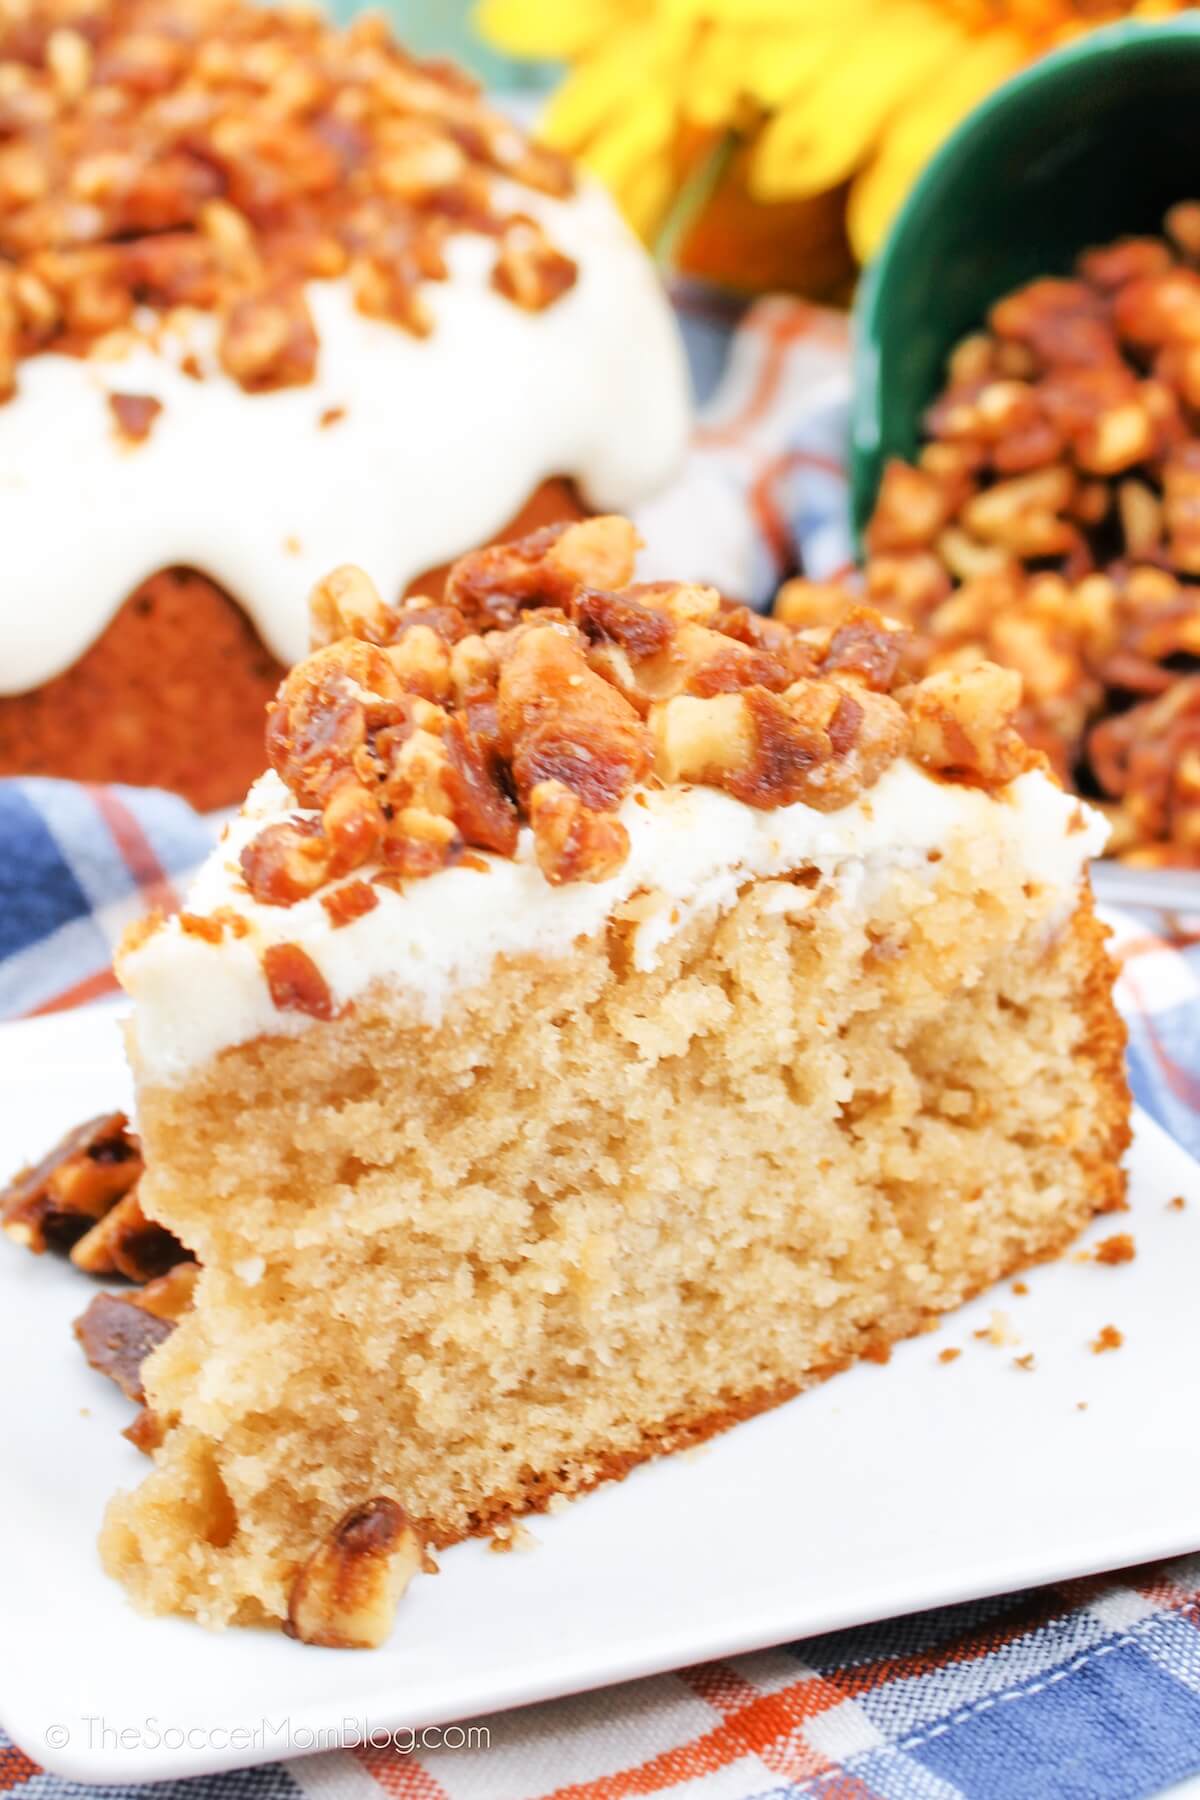 Fireball whisky cake with cream cheese icing and nuts